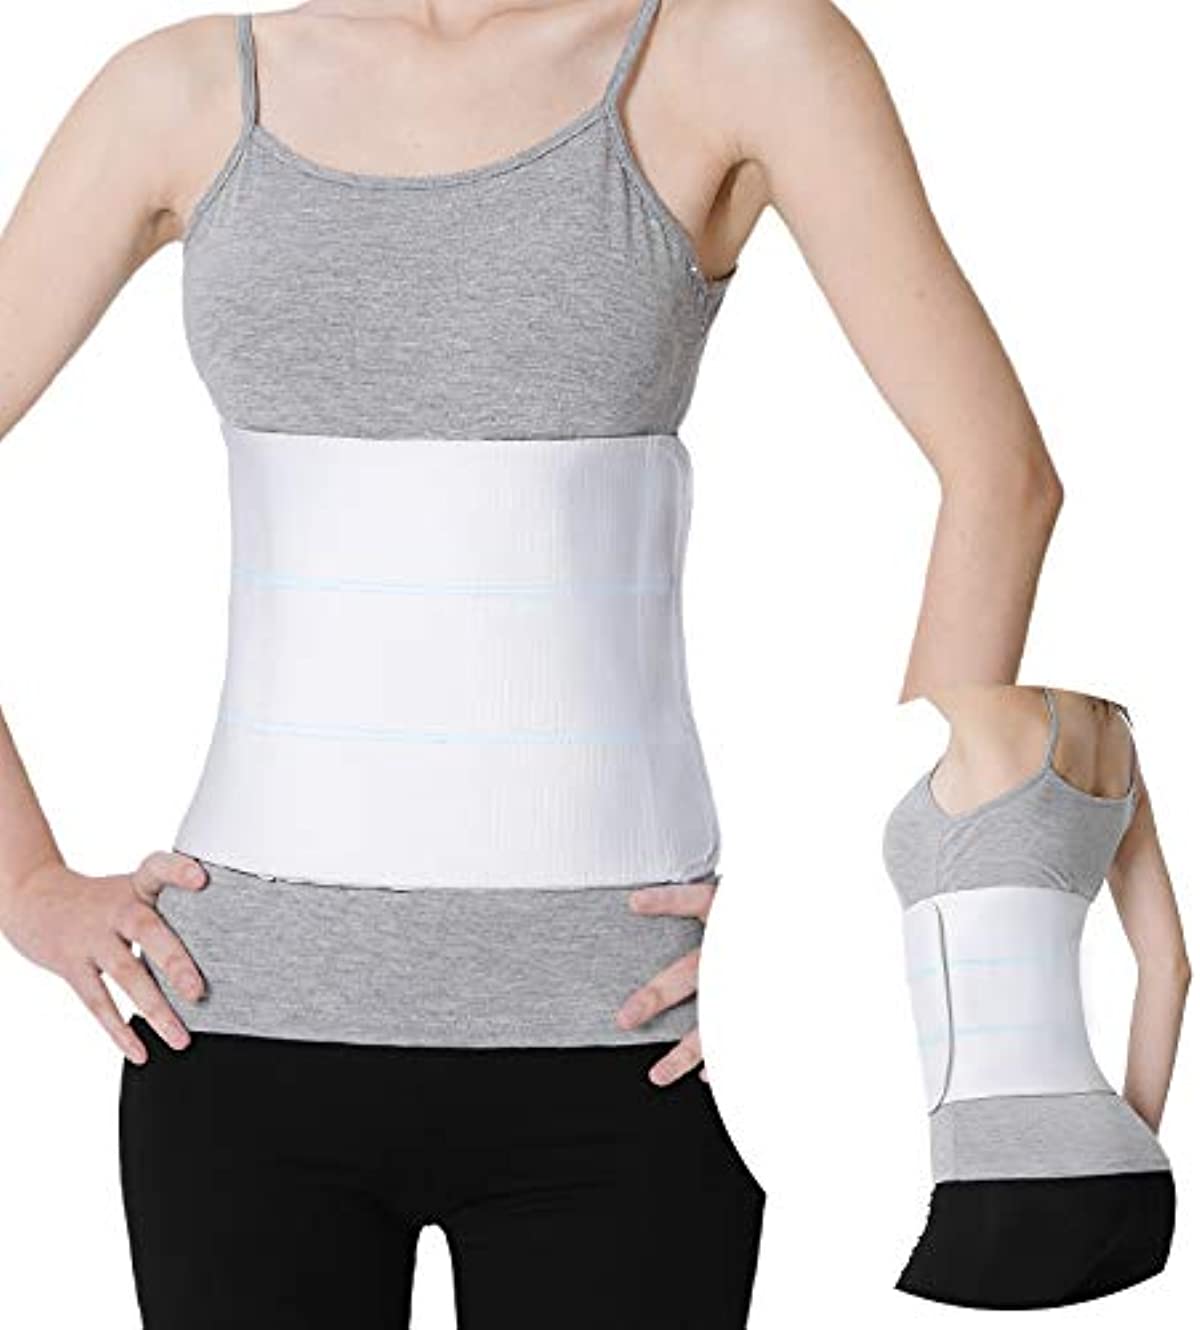 Abdominal Binder Post Surgery for Men and Women, Postpartum Tummy Tuck Belt Provides Slimming Bariatric Stomach Compression,High Elasticity, Breathable - (45\" - 60\") 3 PANEL - 9\"